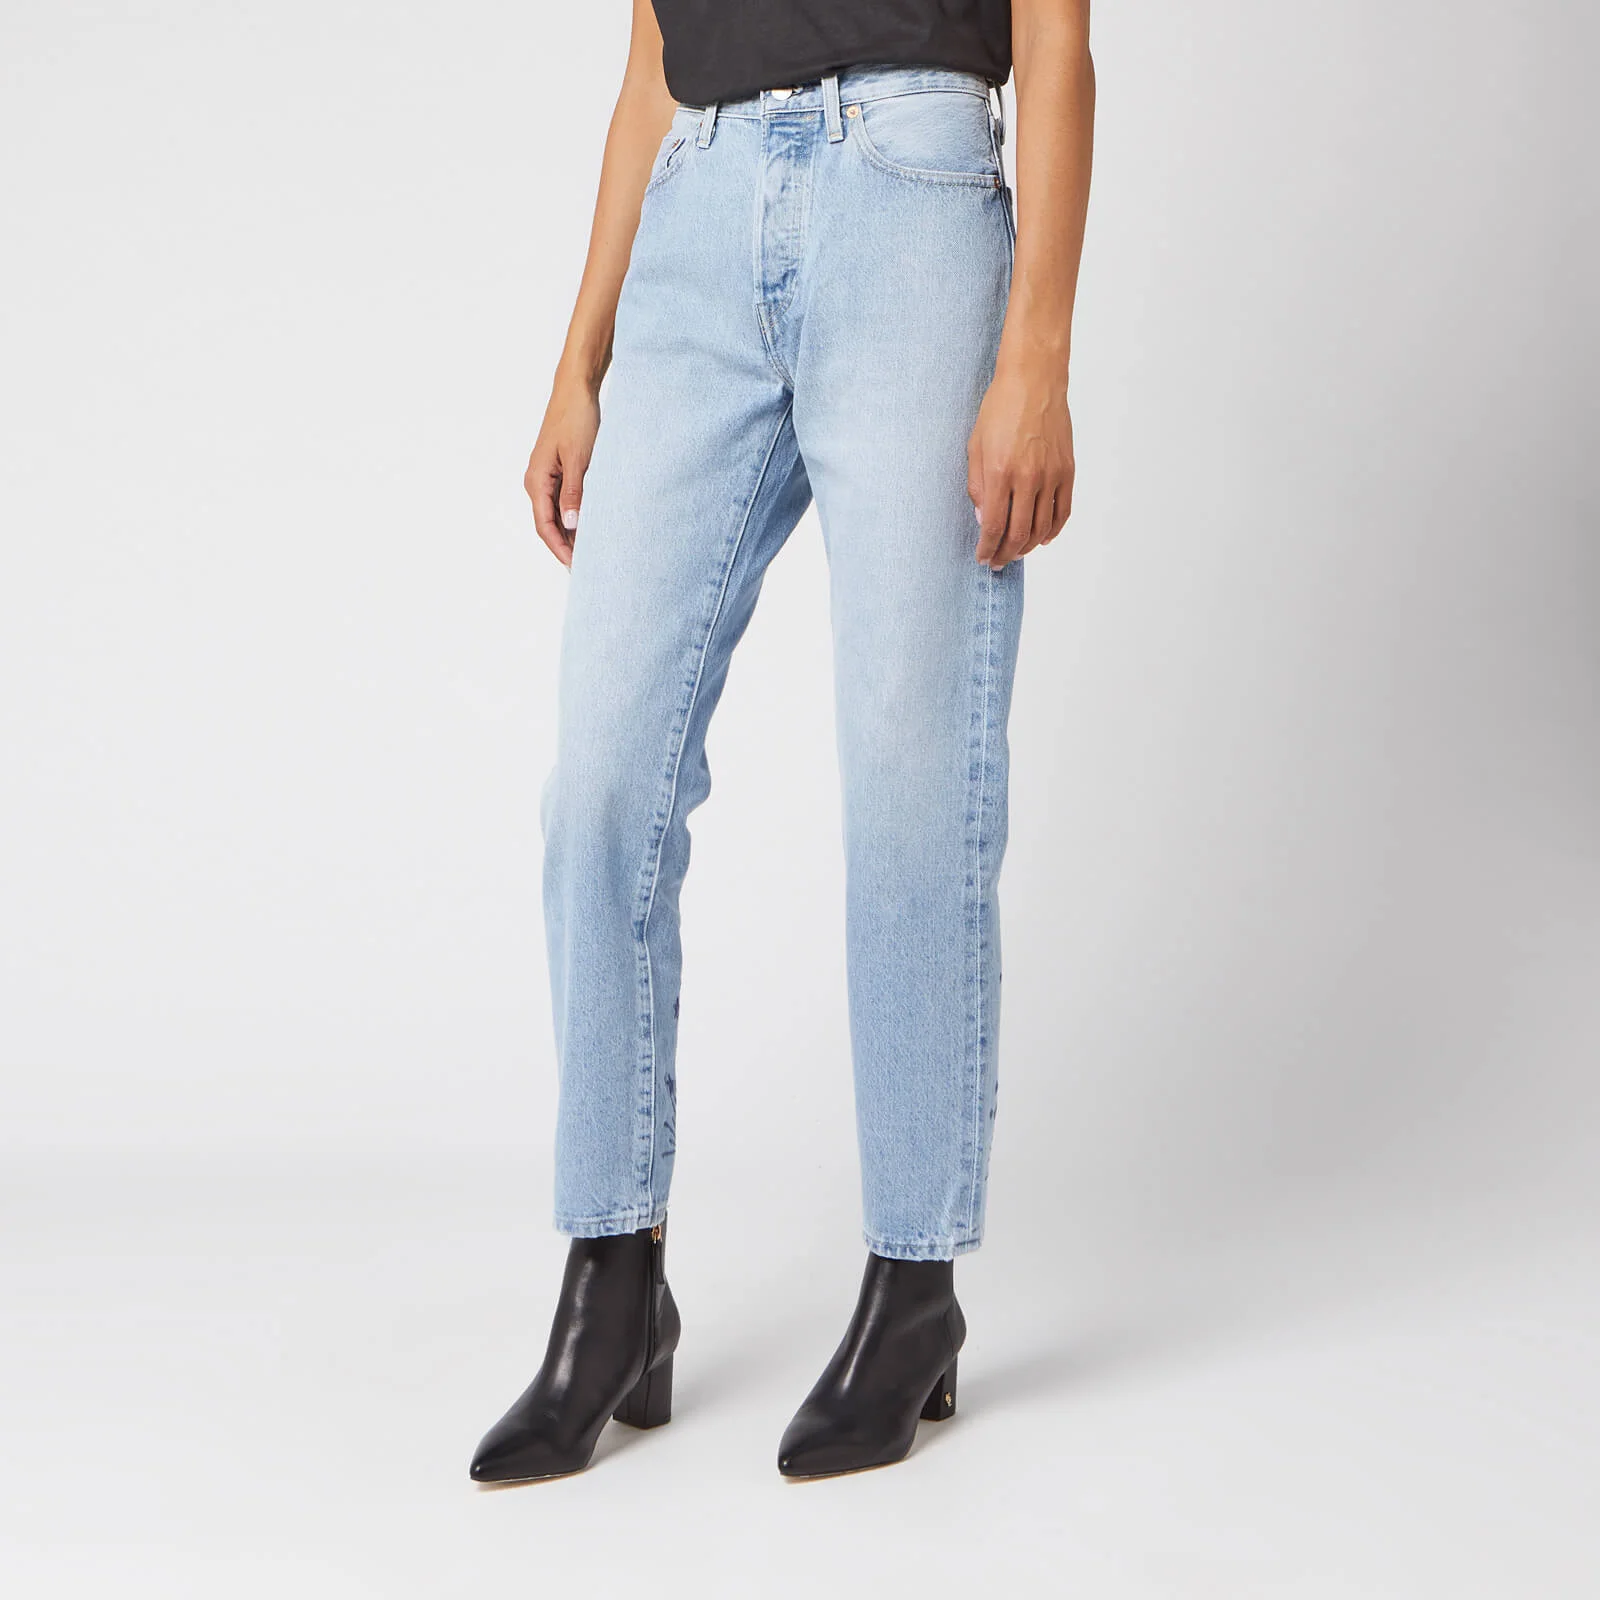 Levi's Women's Made and Crafted 501 Original Jeans - Early Morning Image 1